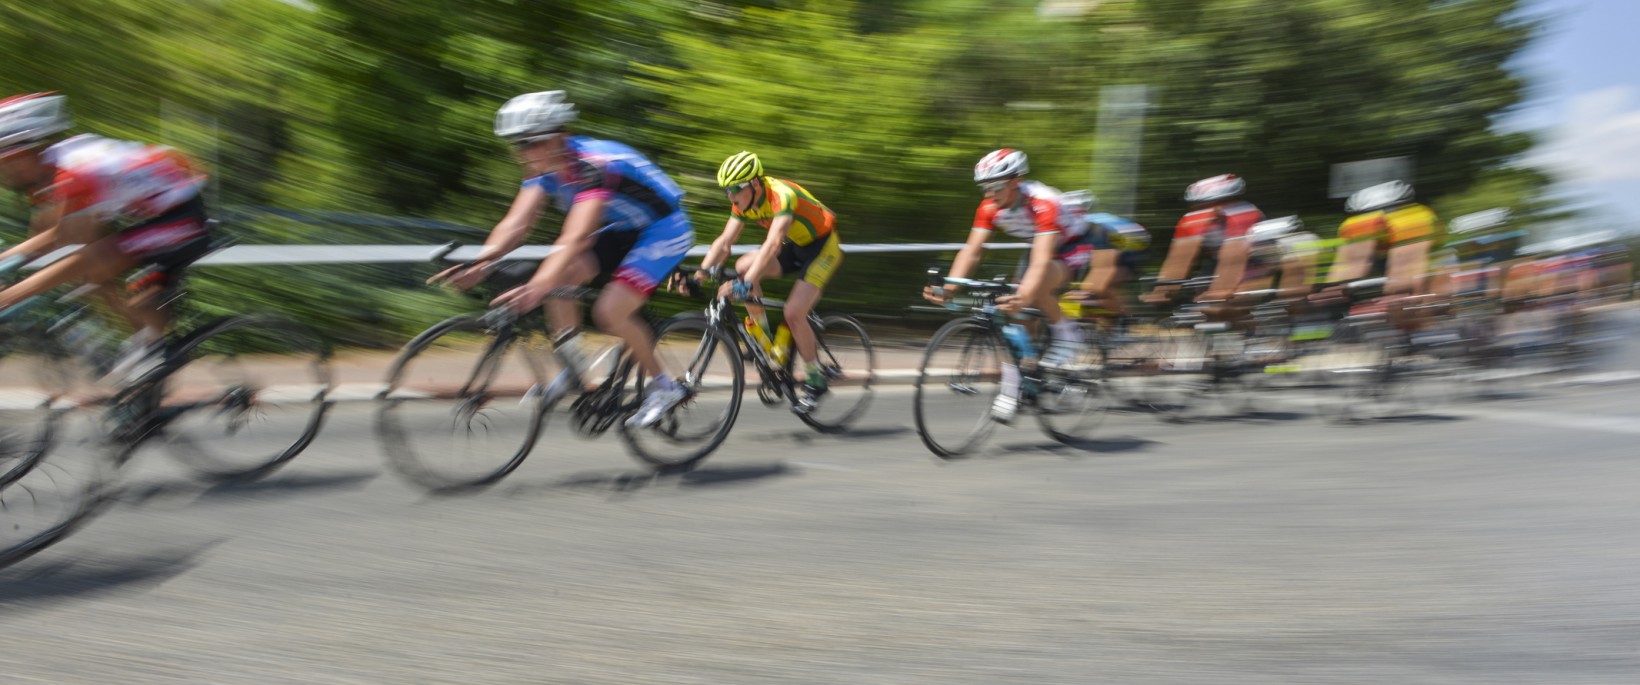 peloton of bicycle riders in a race in motion